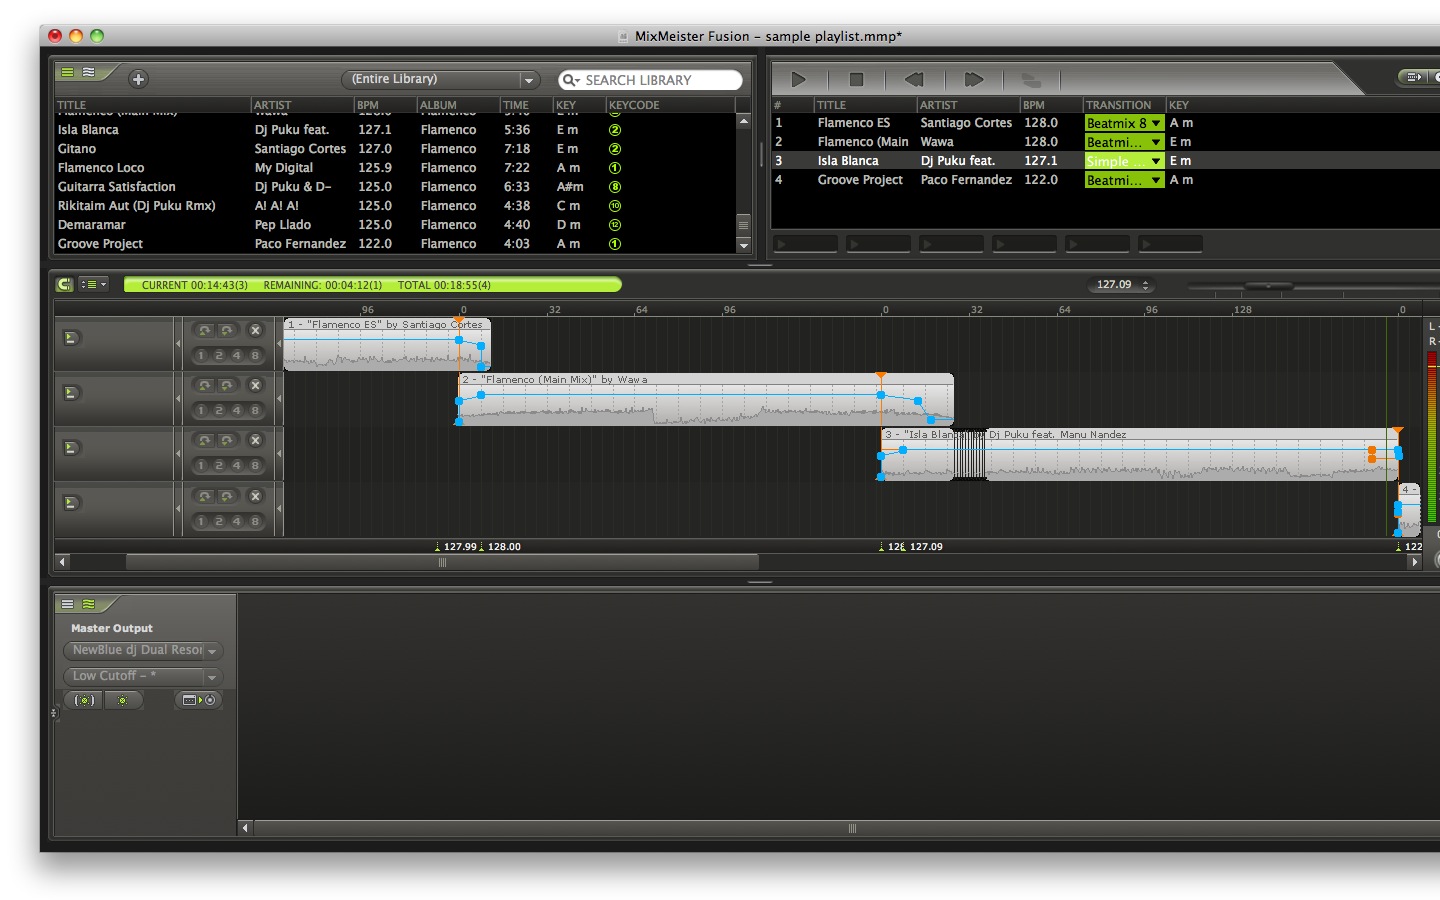 Tuneprompter for mac